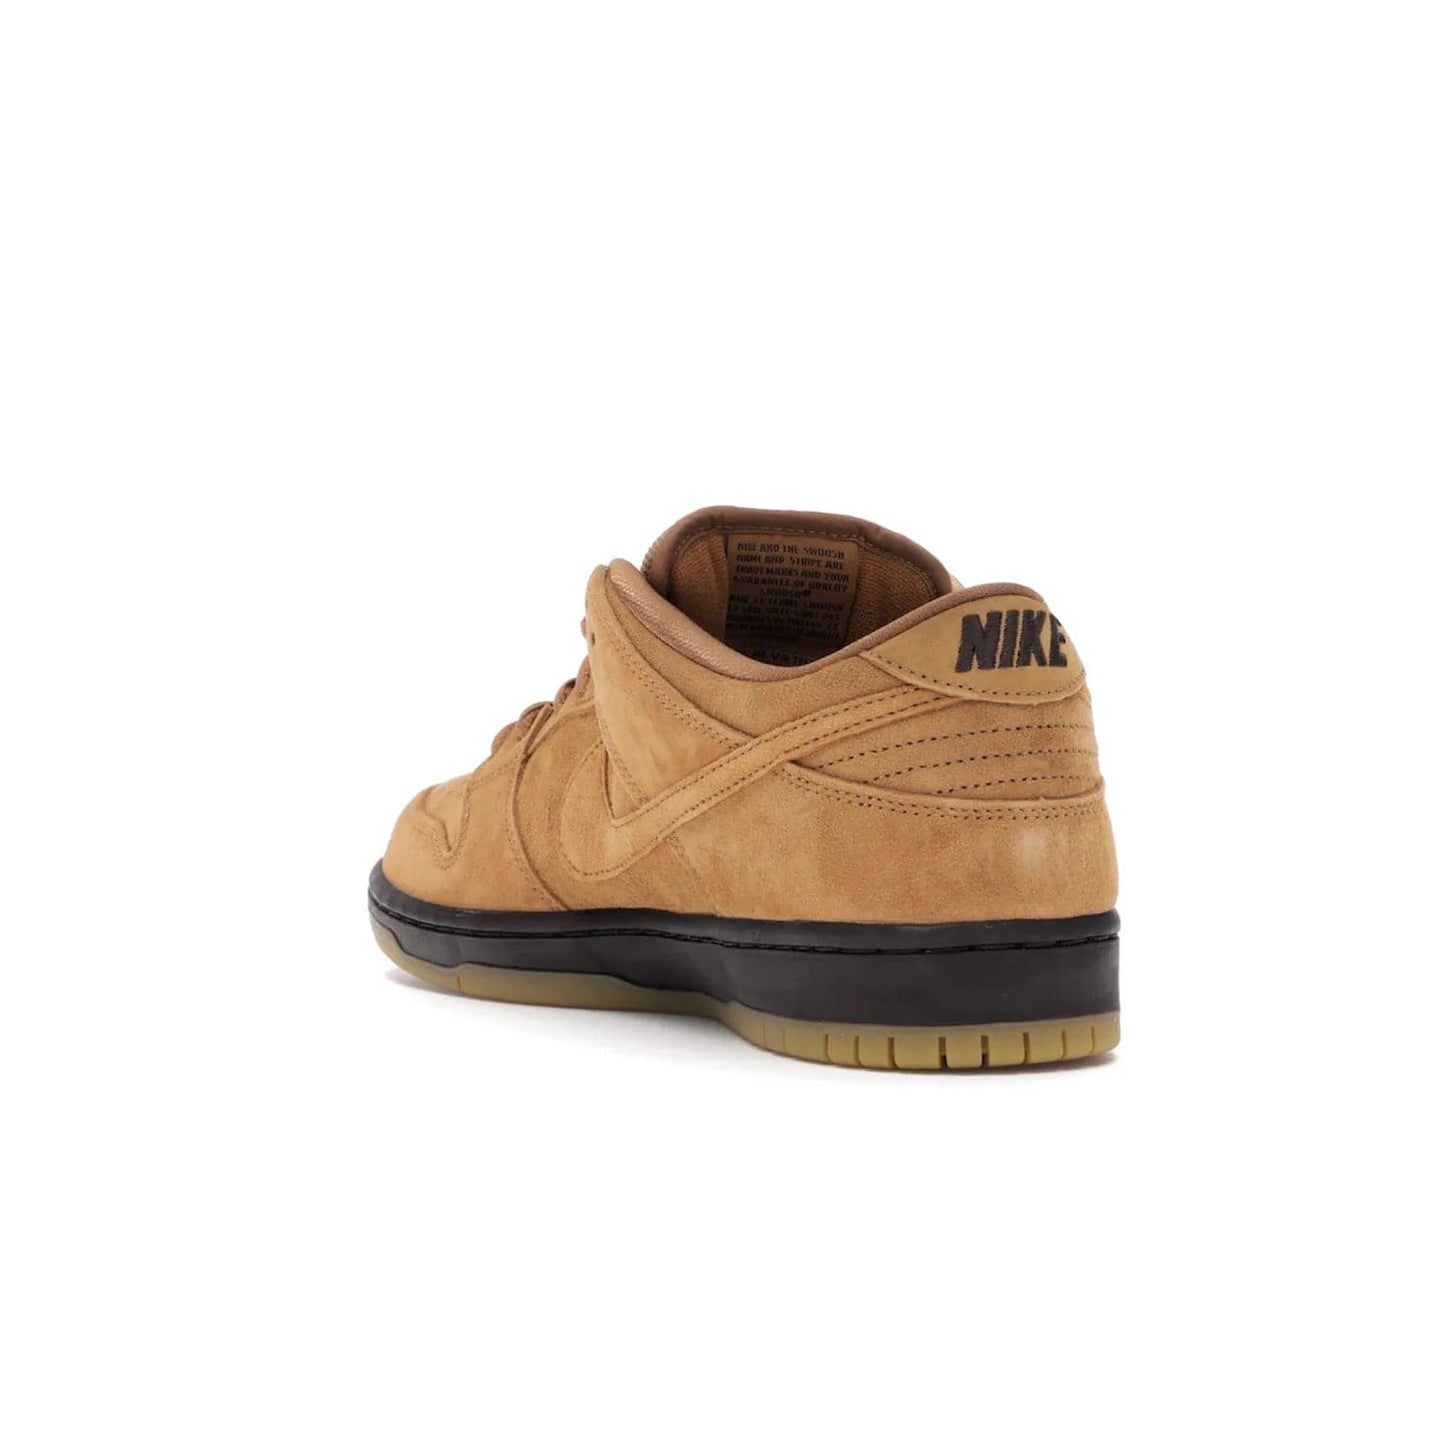 Nike SB Dunk Low Wheat (2021/2023) - Image 25 - Only at www.BallersClubKickz.com - The Nike SB Dunk Low Wheat (2021/2023)has a sleek silhouette and wheat suede upper. Tan tones for lining, mesh tongues, and laces. Iconic color palette midsole, perforated boxing toe. Brown branding on tongue and heel. Gum rubber outsole with partitioned pattern for traction. Eschewed in Feb 2021 for $110.